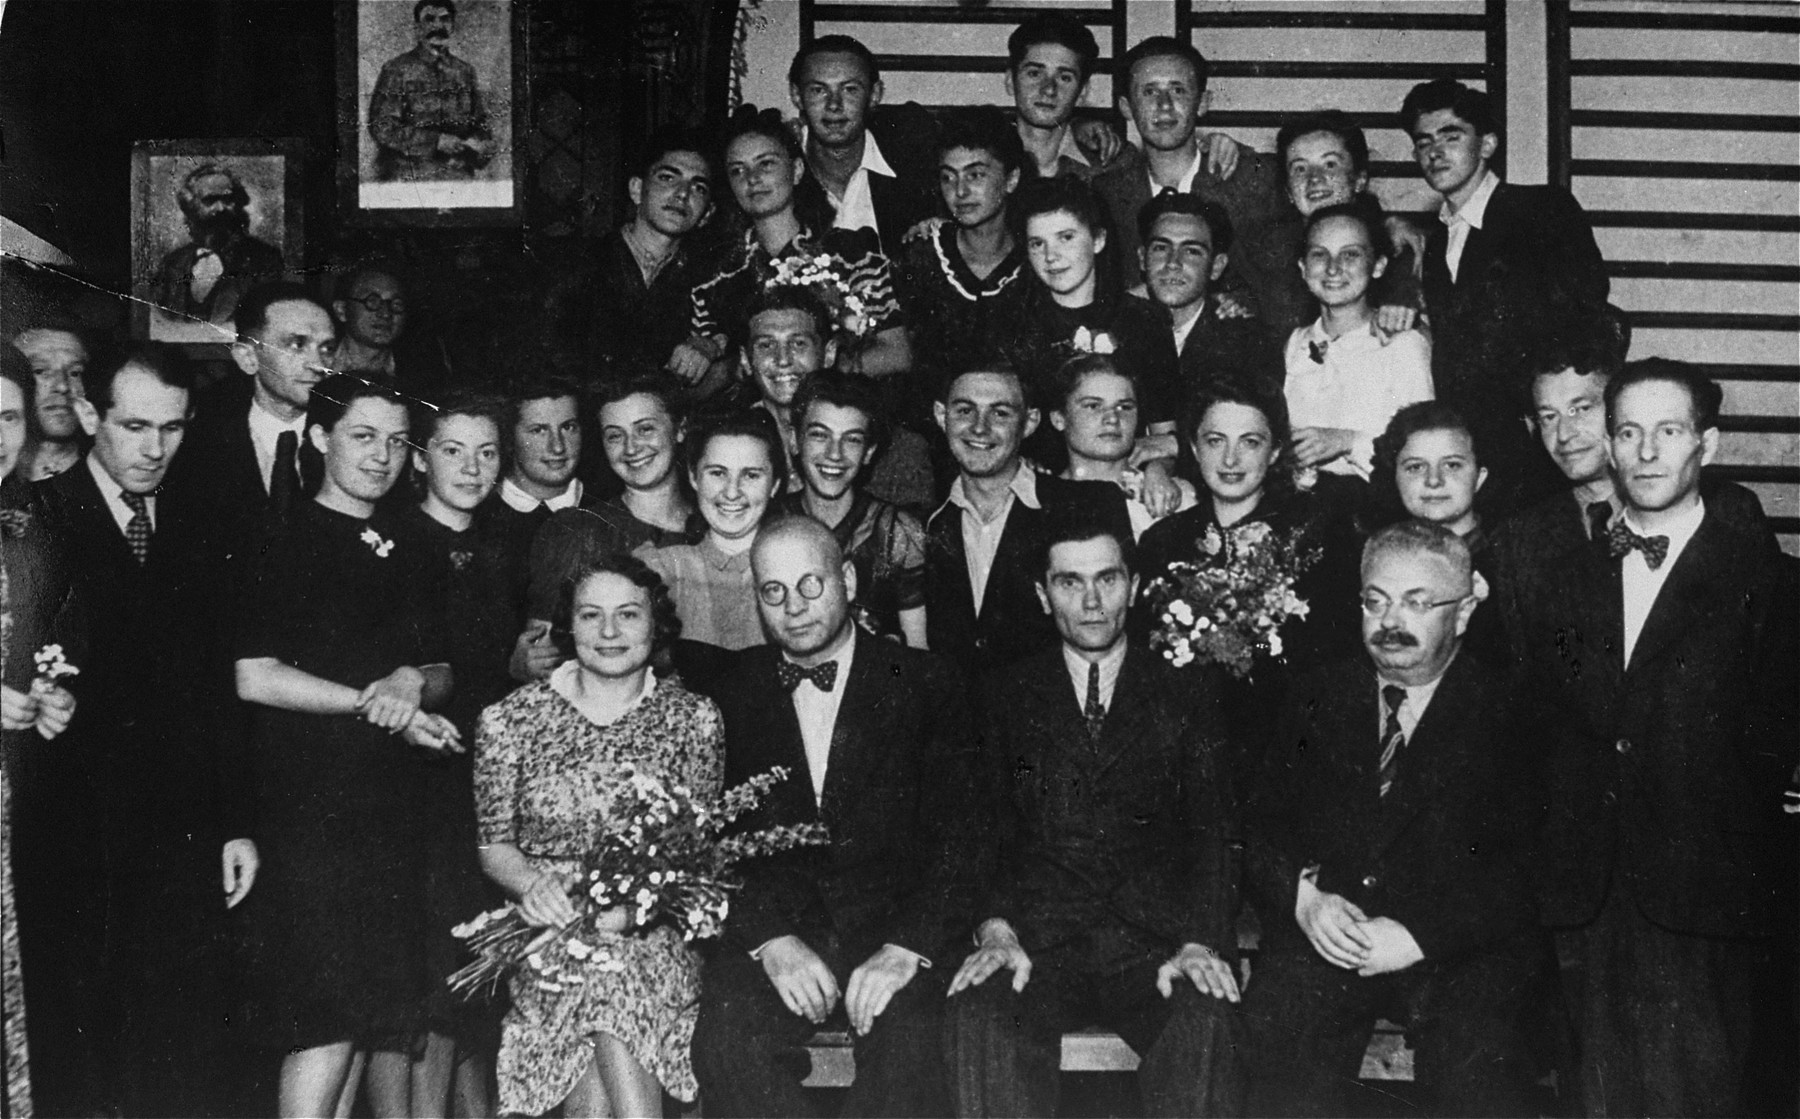 Group portrait of the faculty and graduating class of the Jewish private high school in Drohobycz.

Among those pictured are Bruno Schulz, the Polish author and painter (standing at the left looking down).  Also pictured seated (far left) Mrs. Alter and Jakob Blatt, the principal (far right).  Standing second row, left to right are Bruno Schultz, Mr. Ornstein, unknown, Helena Beck, unknown, unknown, unknown, Tusia Schenkelbach, Ozia Stranzer, Olga Salata, Mrs. Rosberger (nee Harz), Sima Iwaszczenko, Nemlich, Adolph Hirschberg.  Third row: Stempler (?), Ida Hennenfeld, unknown, Rysia Resnick, unknown, and  Lola Oppenheim.  Top row:  Kaiko Kupferberg,  Imek Weiss, Bloch, unknown and a Jewish refugee from Vienna.  Others pictured are Rudek Lanc, and Fredek Koch.